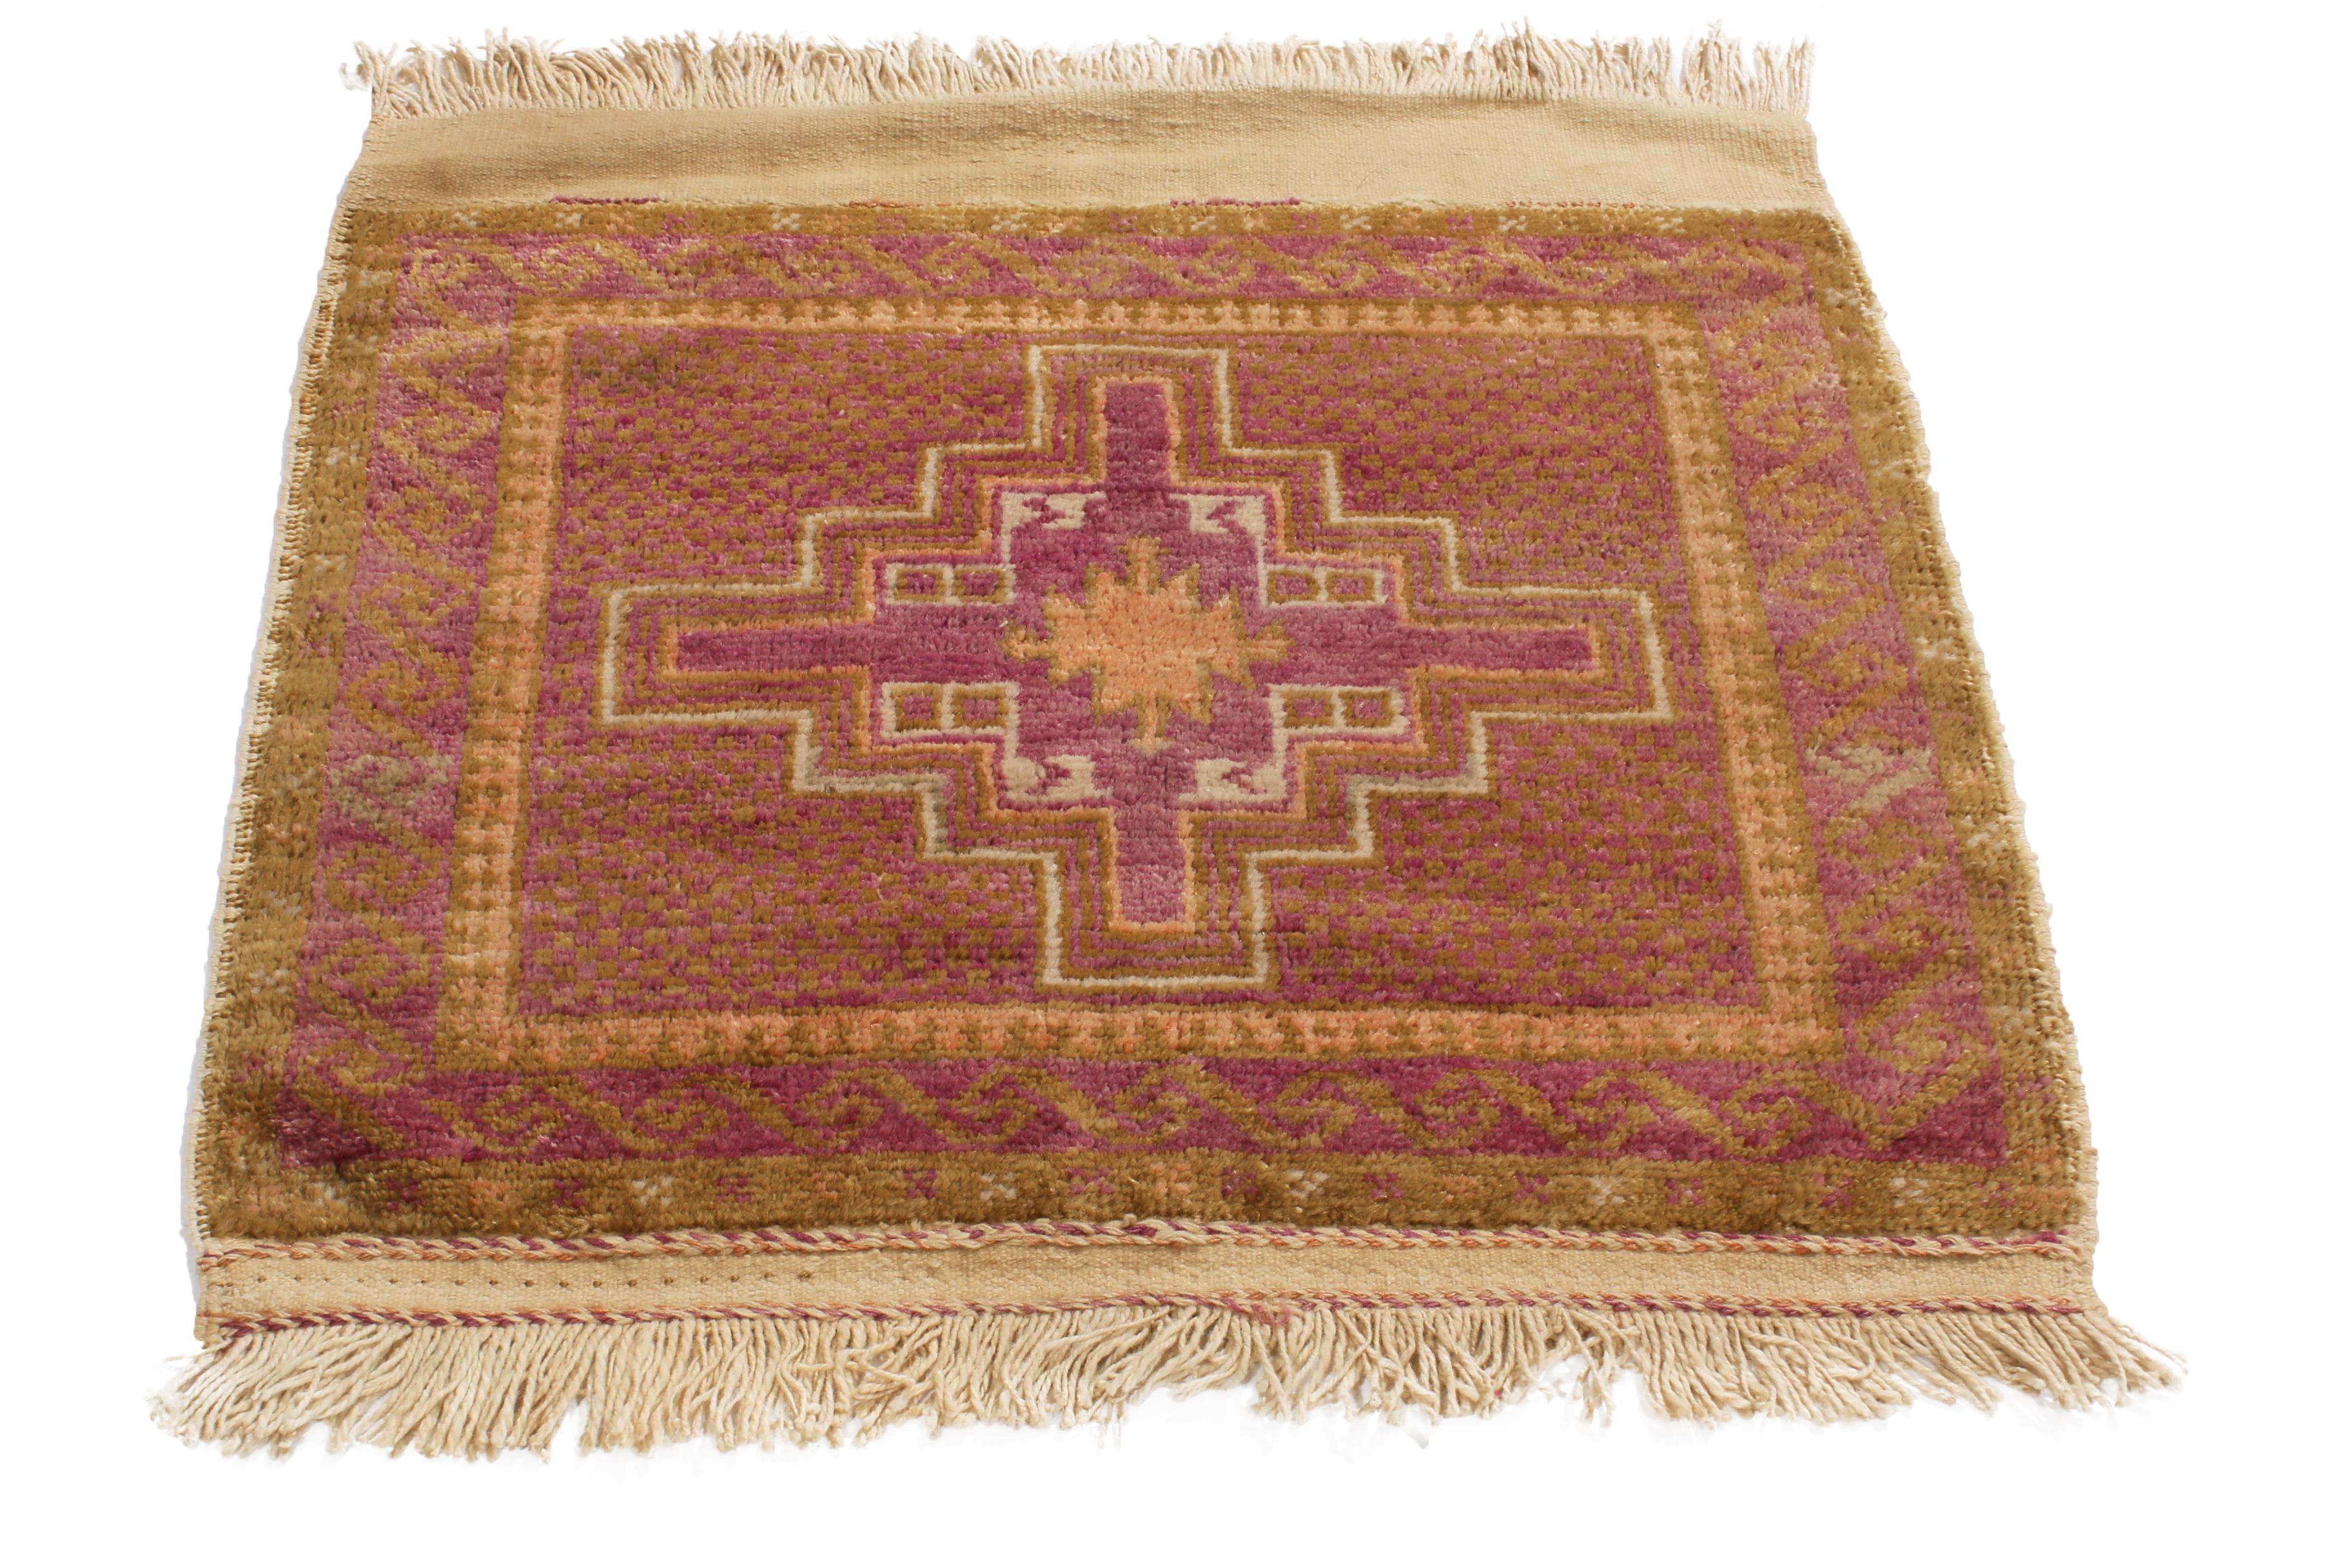 Hand knotted in a durable, high-quality wool body originating from Persia in 1950, this vintage Baluch Persian square rug hosts one of the most uncommon combinations of luminous purple and gold colorways in its borders and field design, sharing a